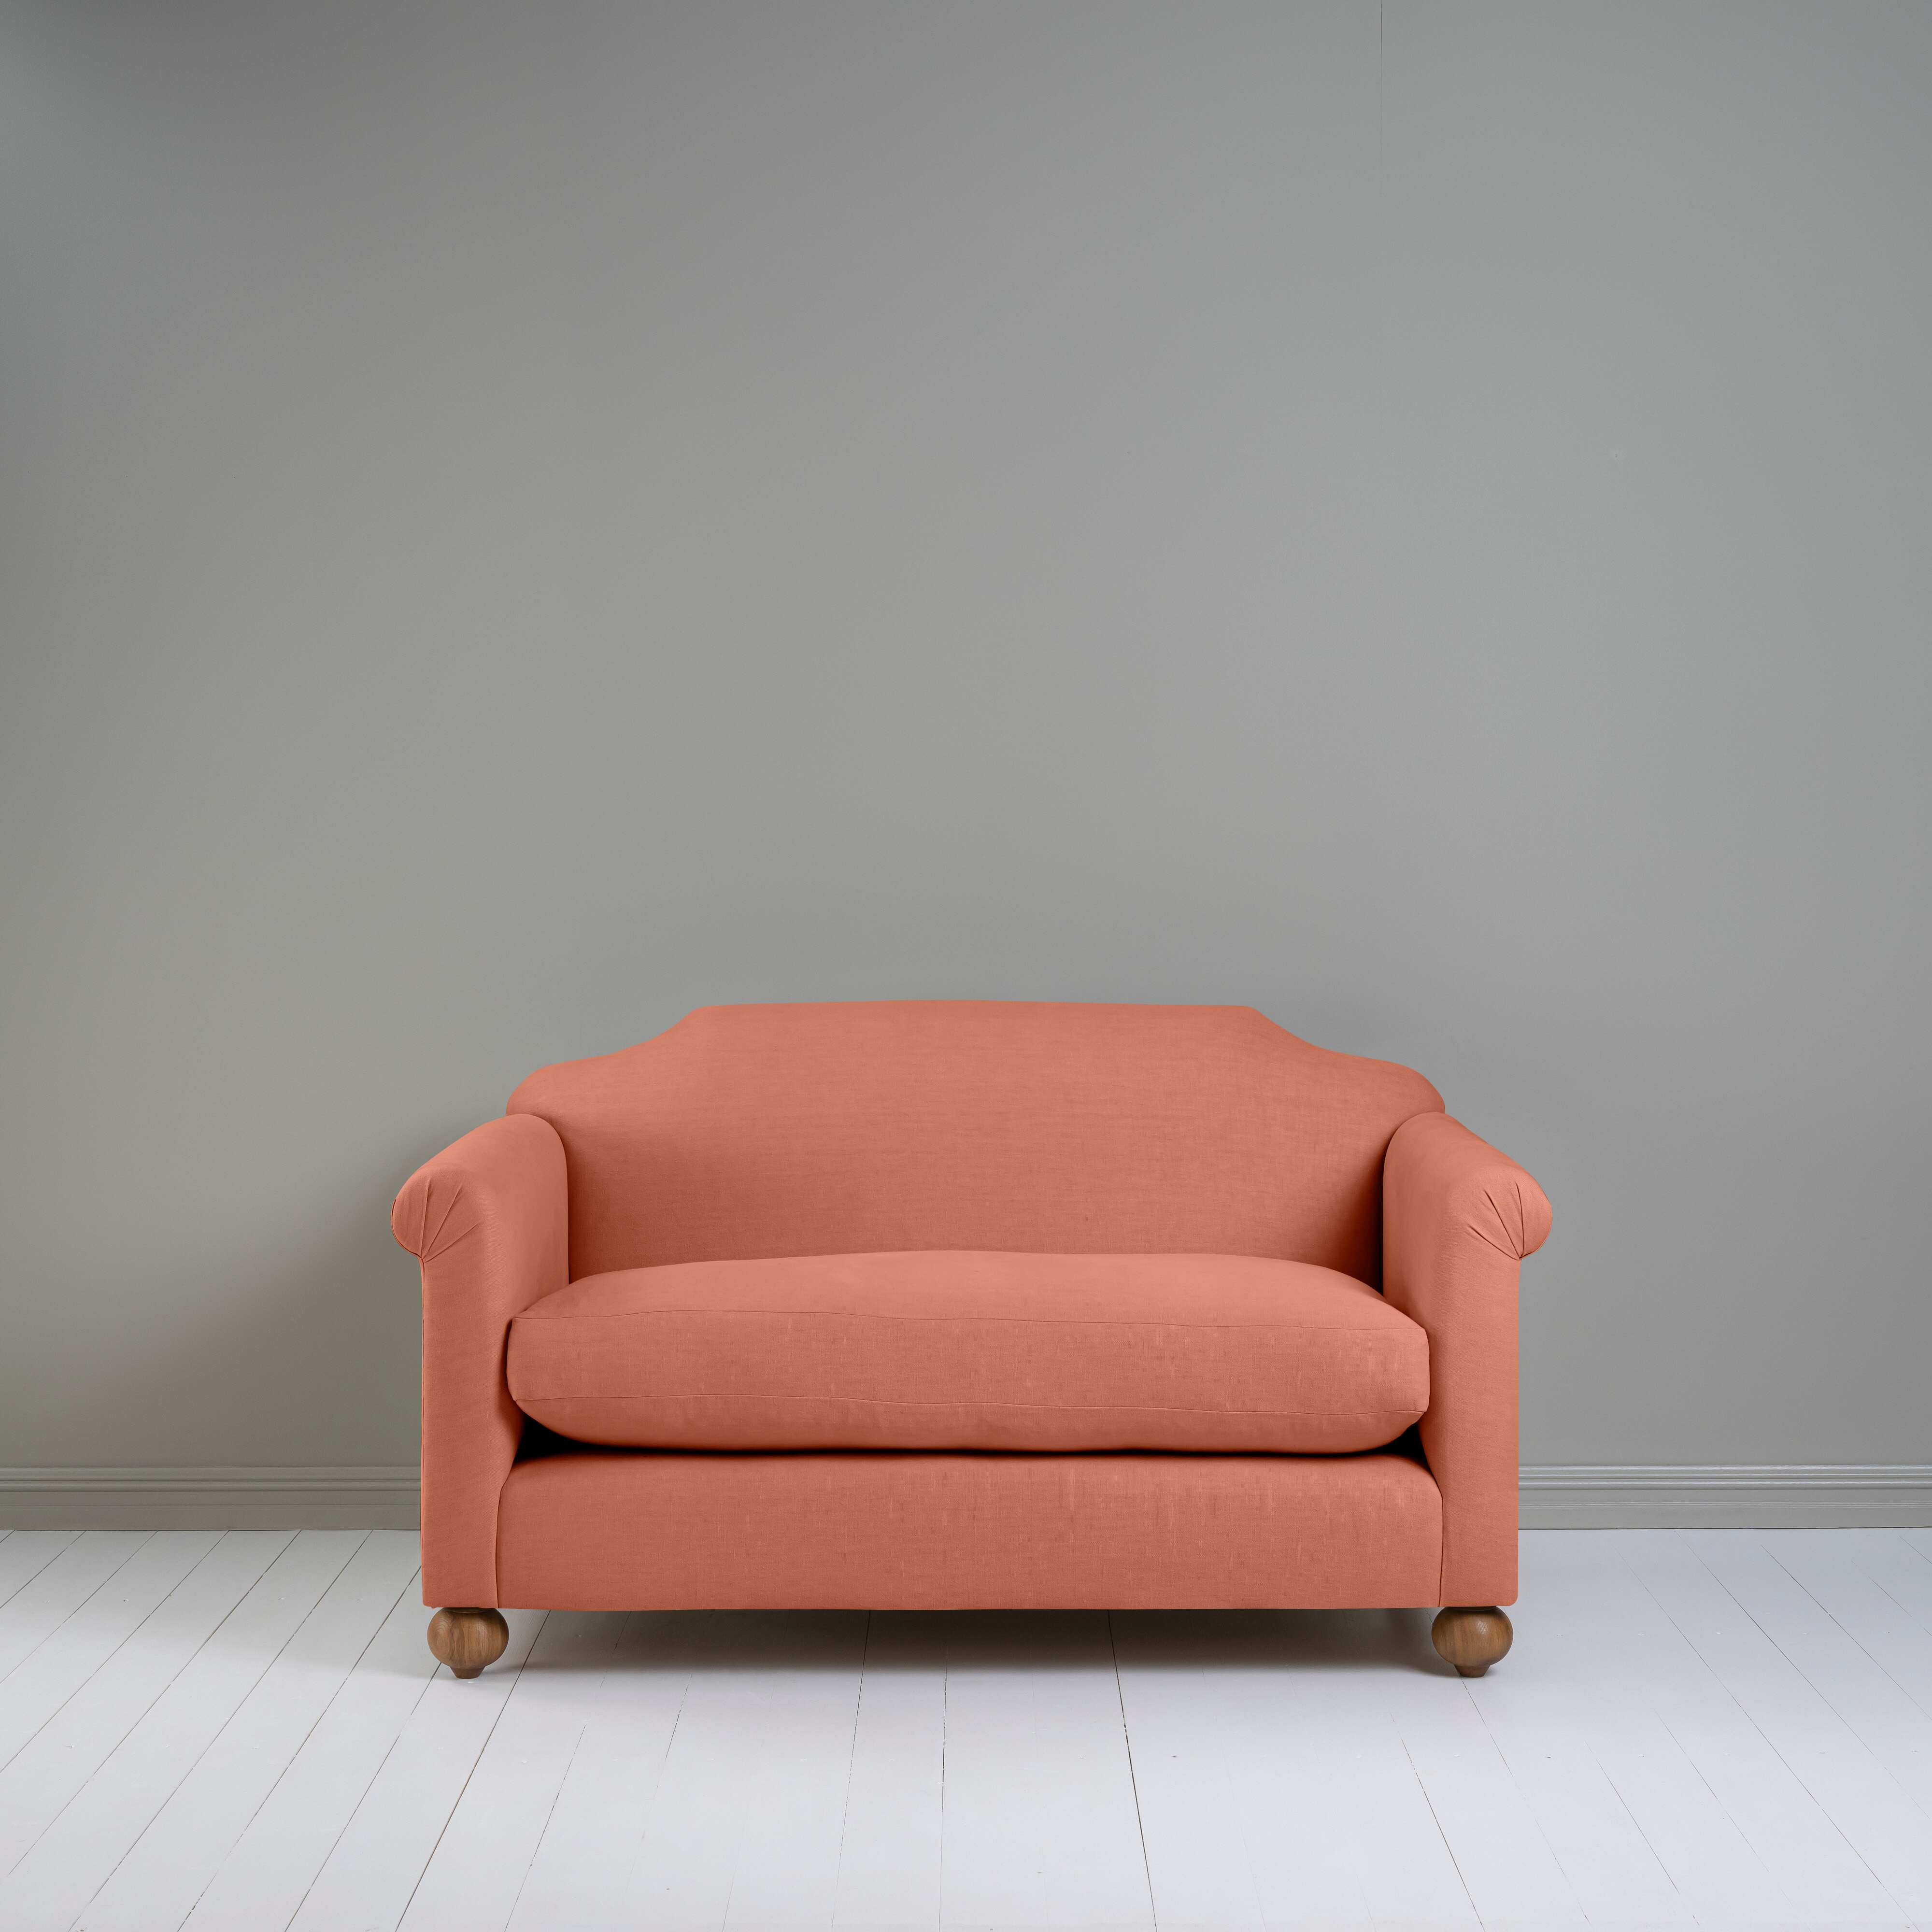  Dolittle 2 Seater Sofa in Laidback Linen Cayenne 